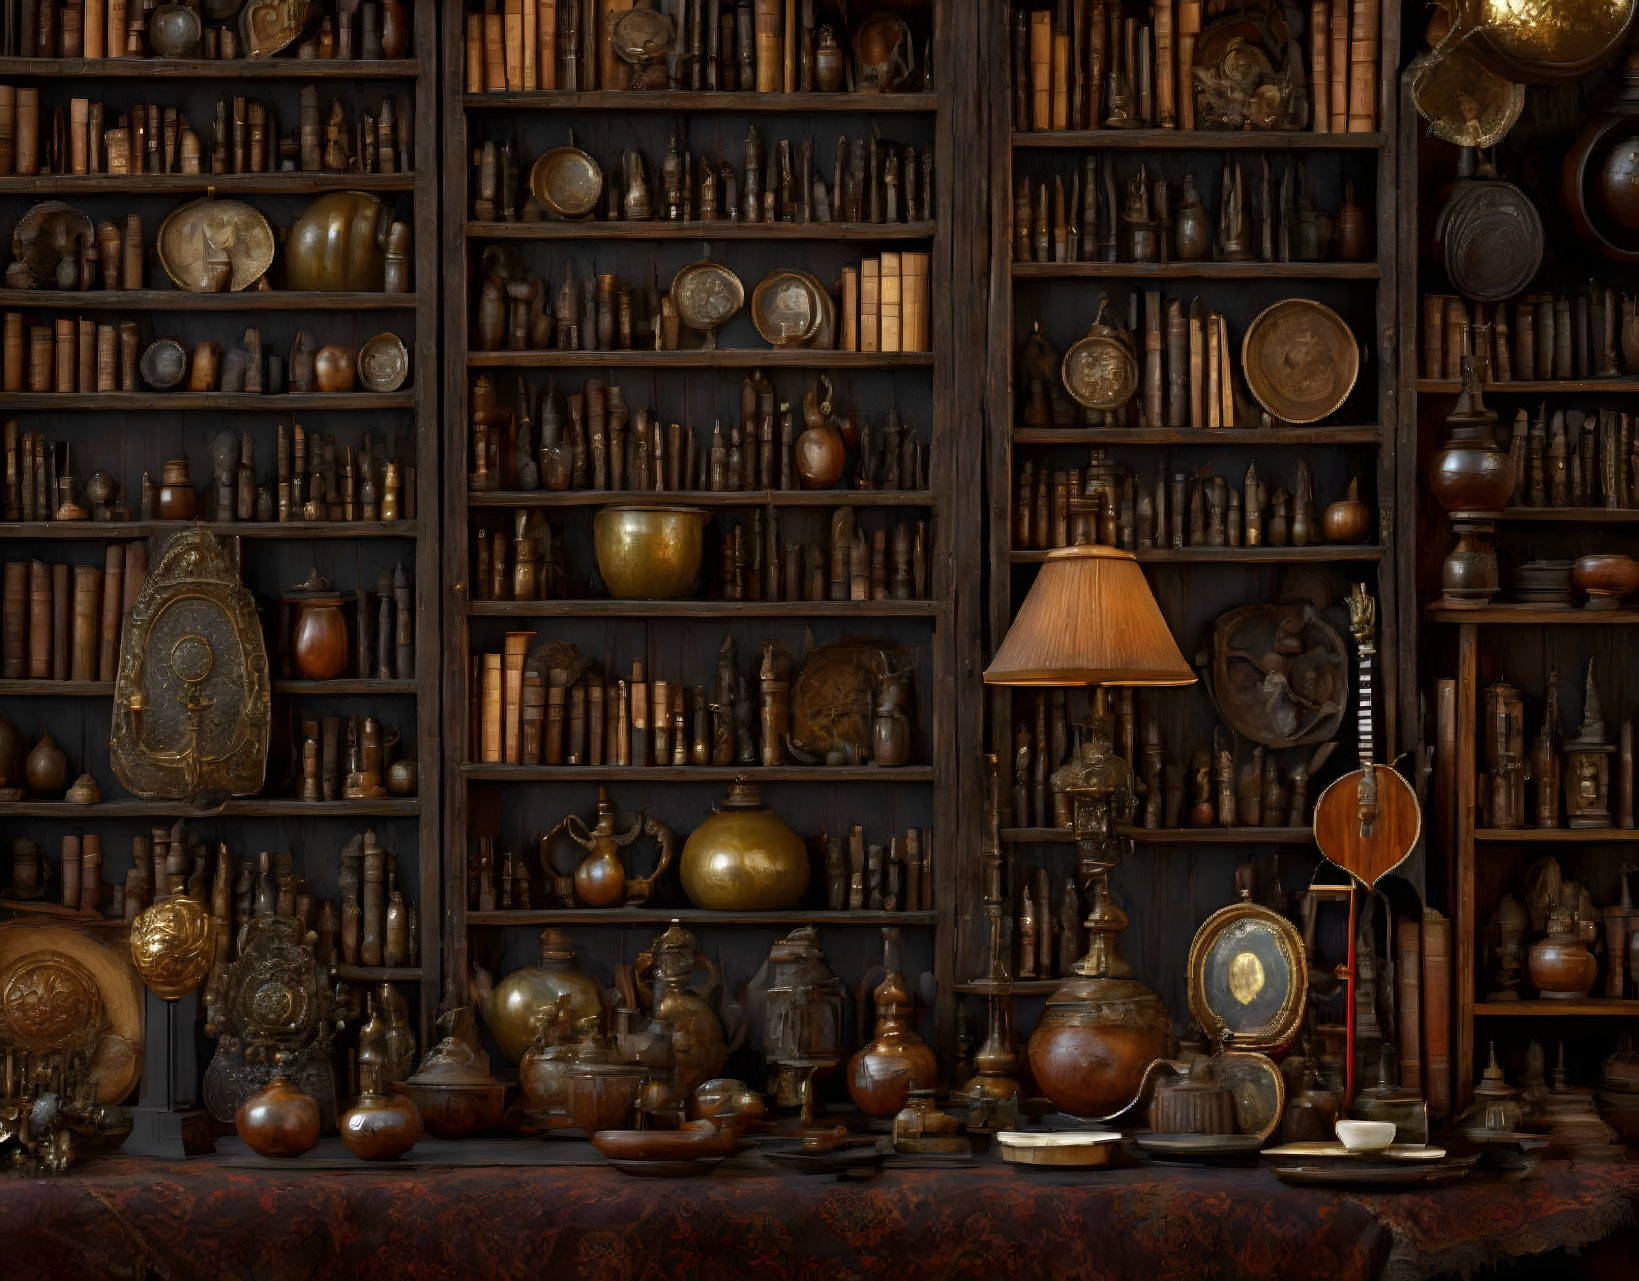 Vintage study with guitar, books, and antique items on wooden shelves